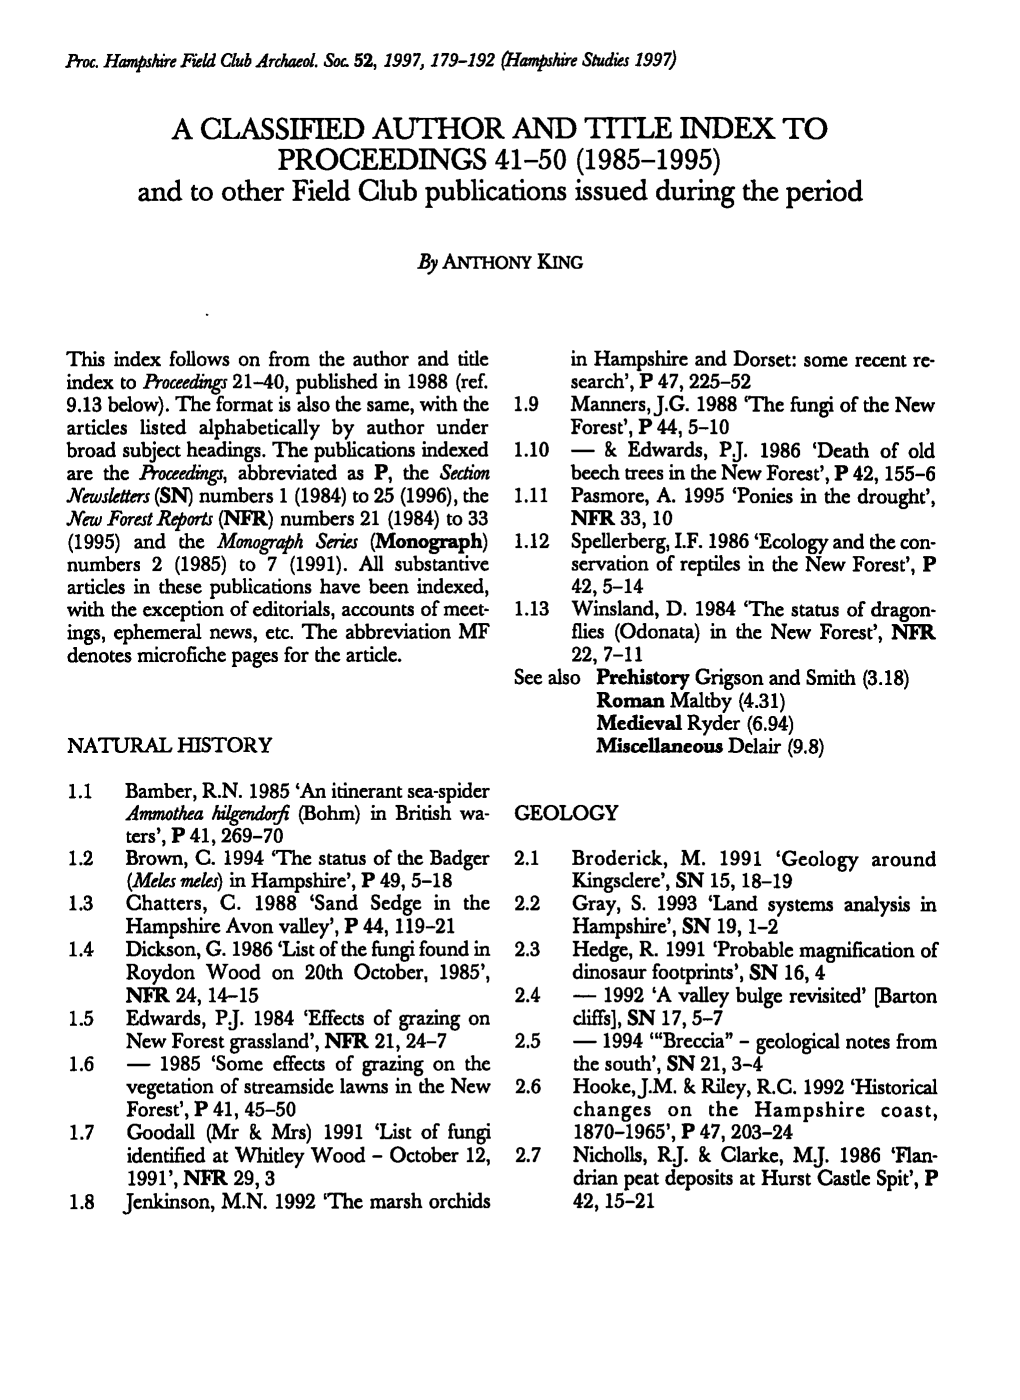 A CLASSIFIED AUTHOR and TITLE INDEX to PROCEEDINGS 41-50 (1985-1995) and to Other Field Club Publications Issued During the Period